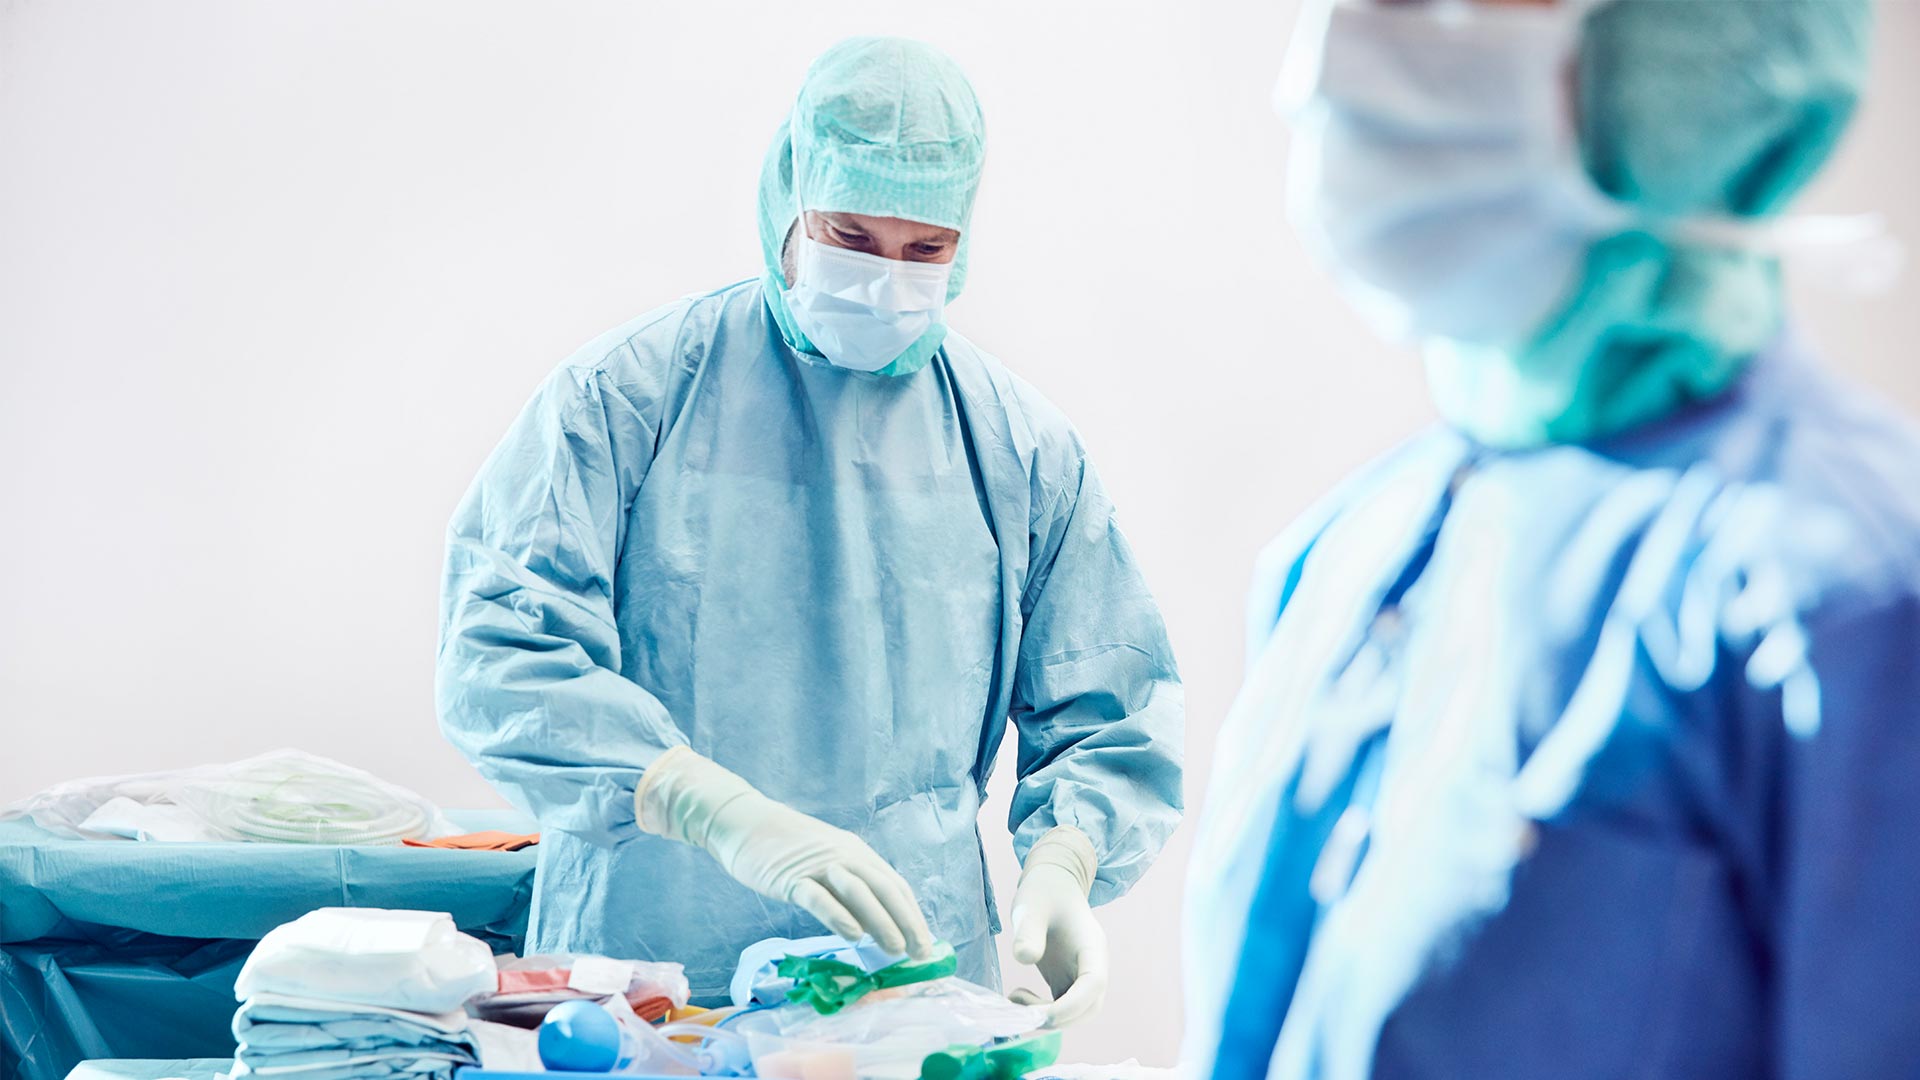 Male surgeon in operating room 